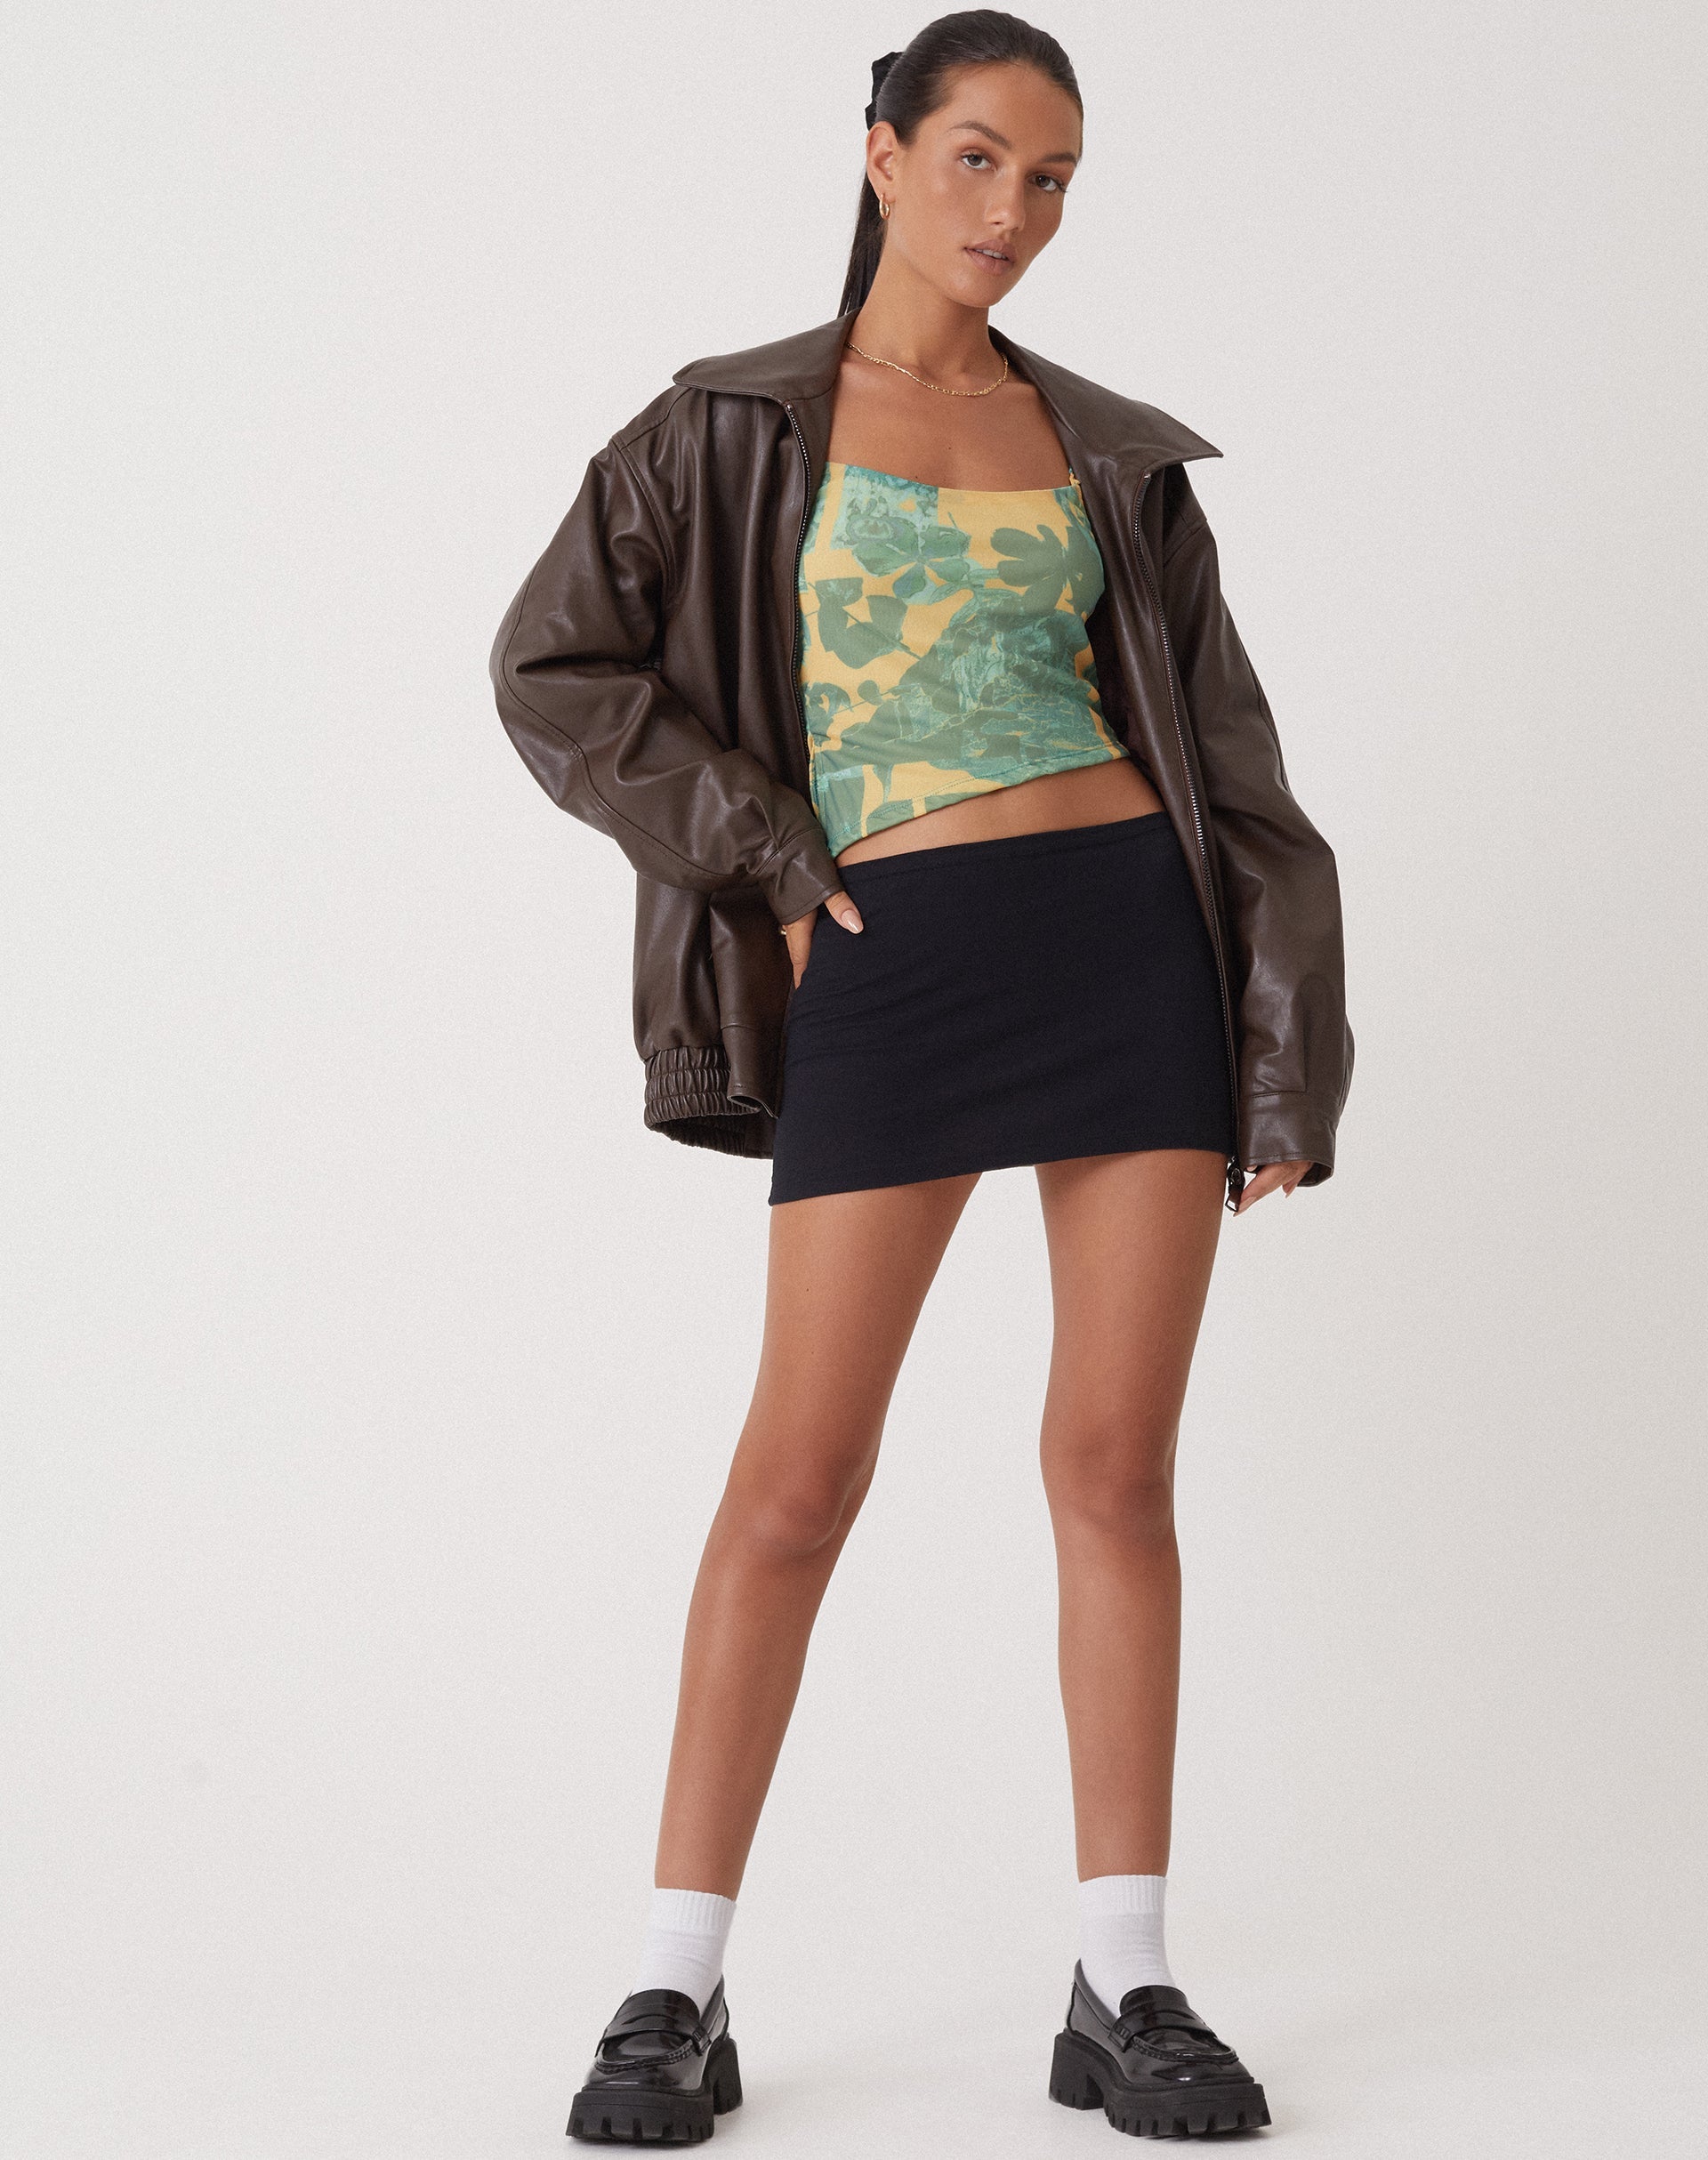 Image of MOTEL X OLIVIA NEILL Asteria Crop Top in Collage Floral Shadow Green